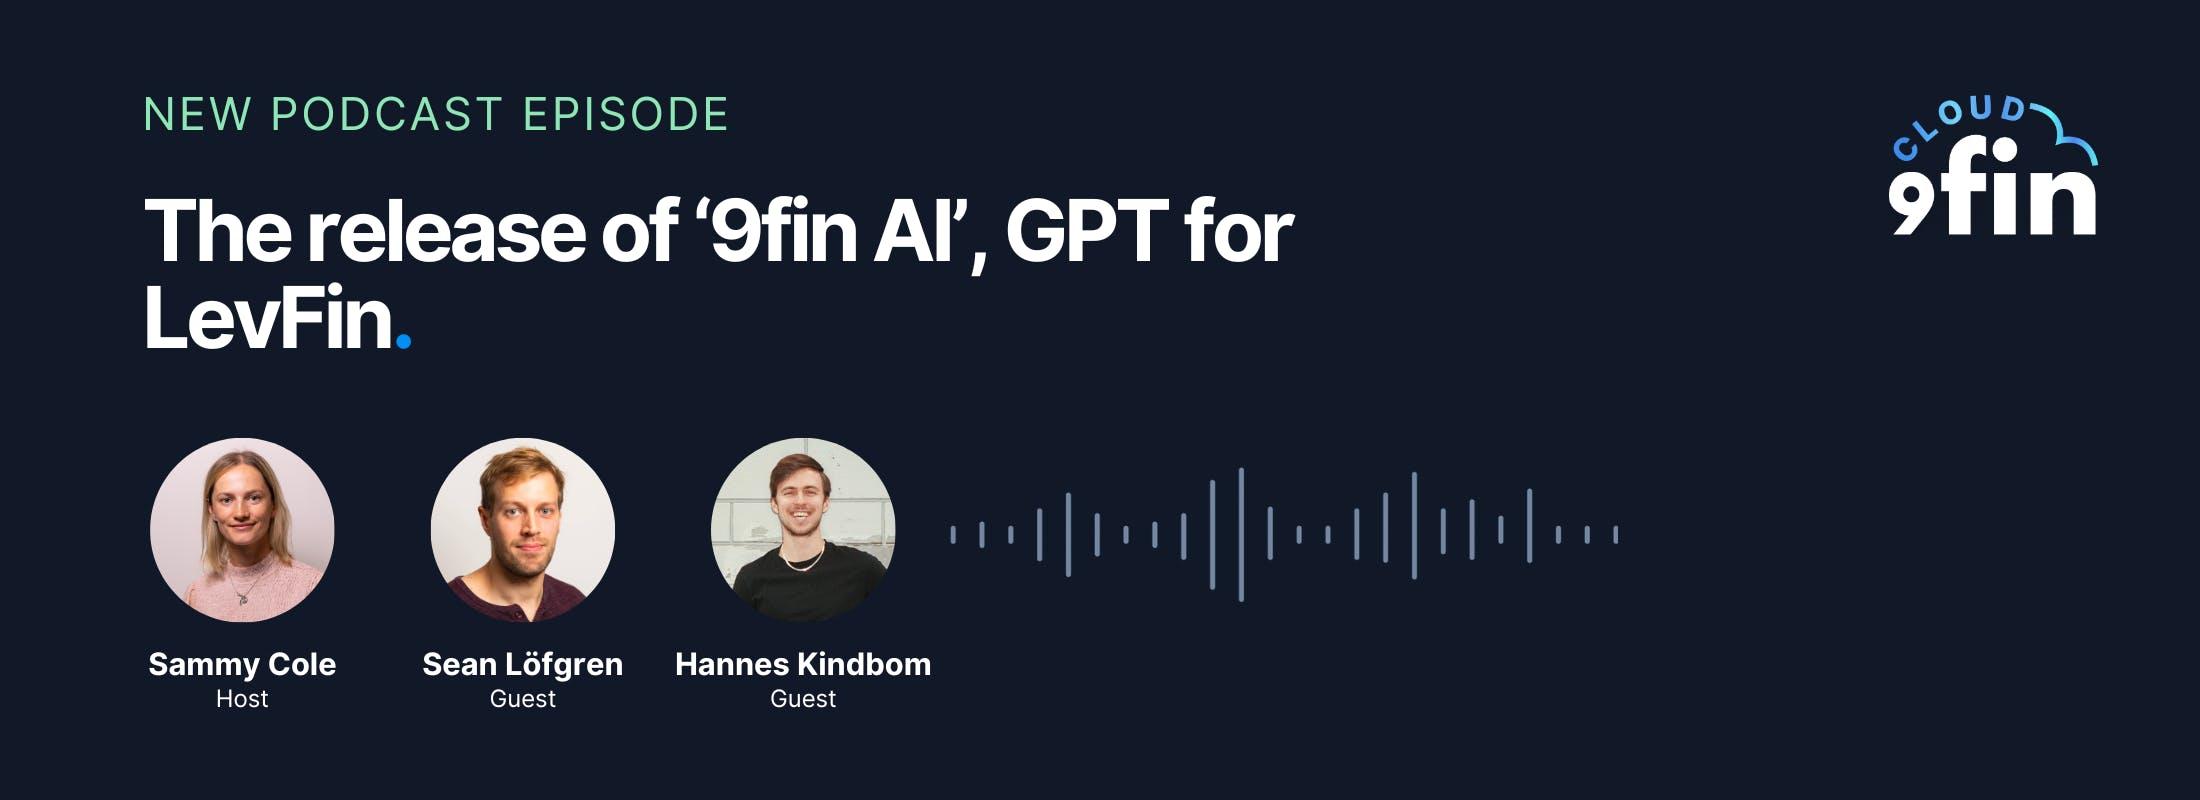 The release of ‘9fin AI’, GPT for LevFin